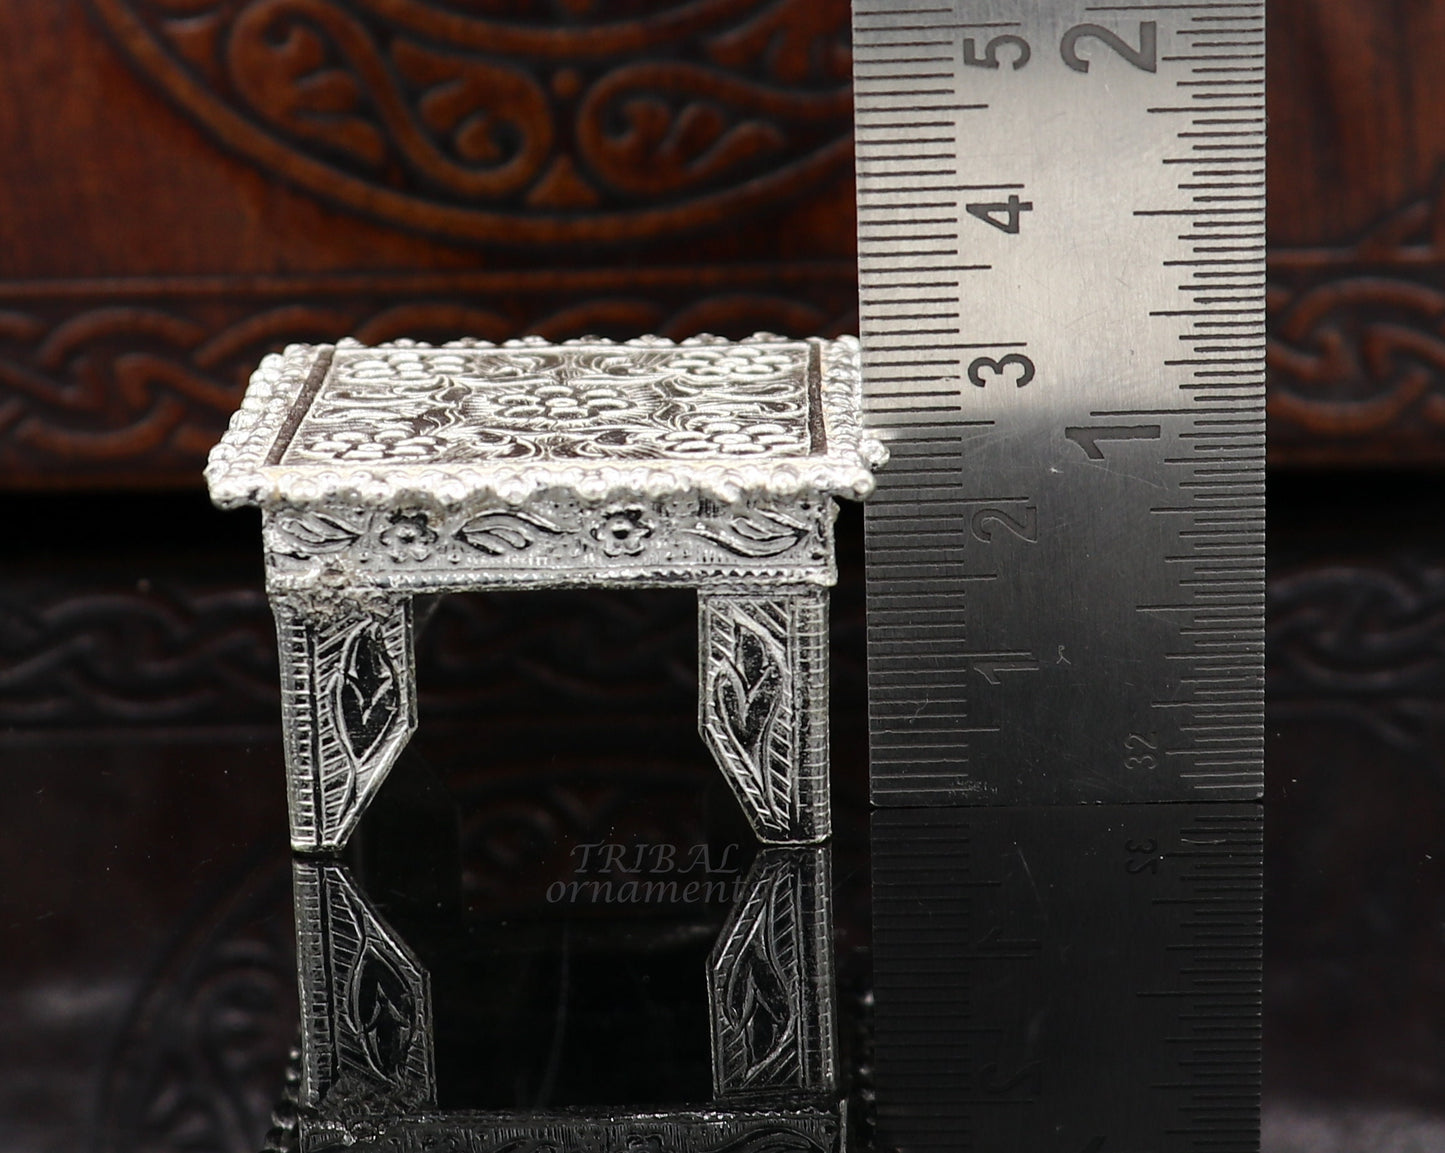 1.6" Vintage design Sterling silver handmade customize small square shape table/bazot/chouki, excellent home puja utensils temple art su952 - TRIBAL ORNAMENTS